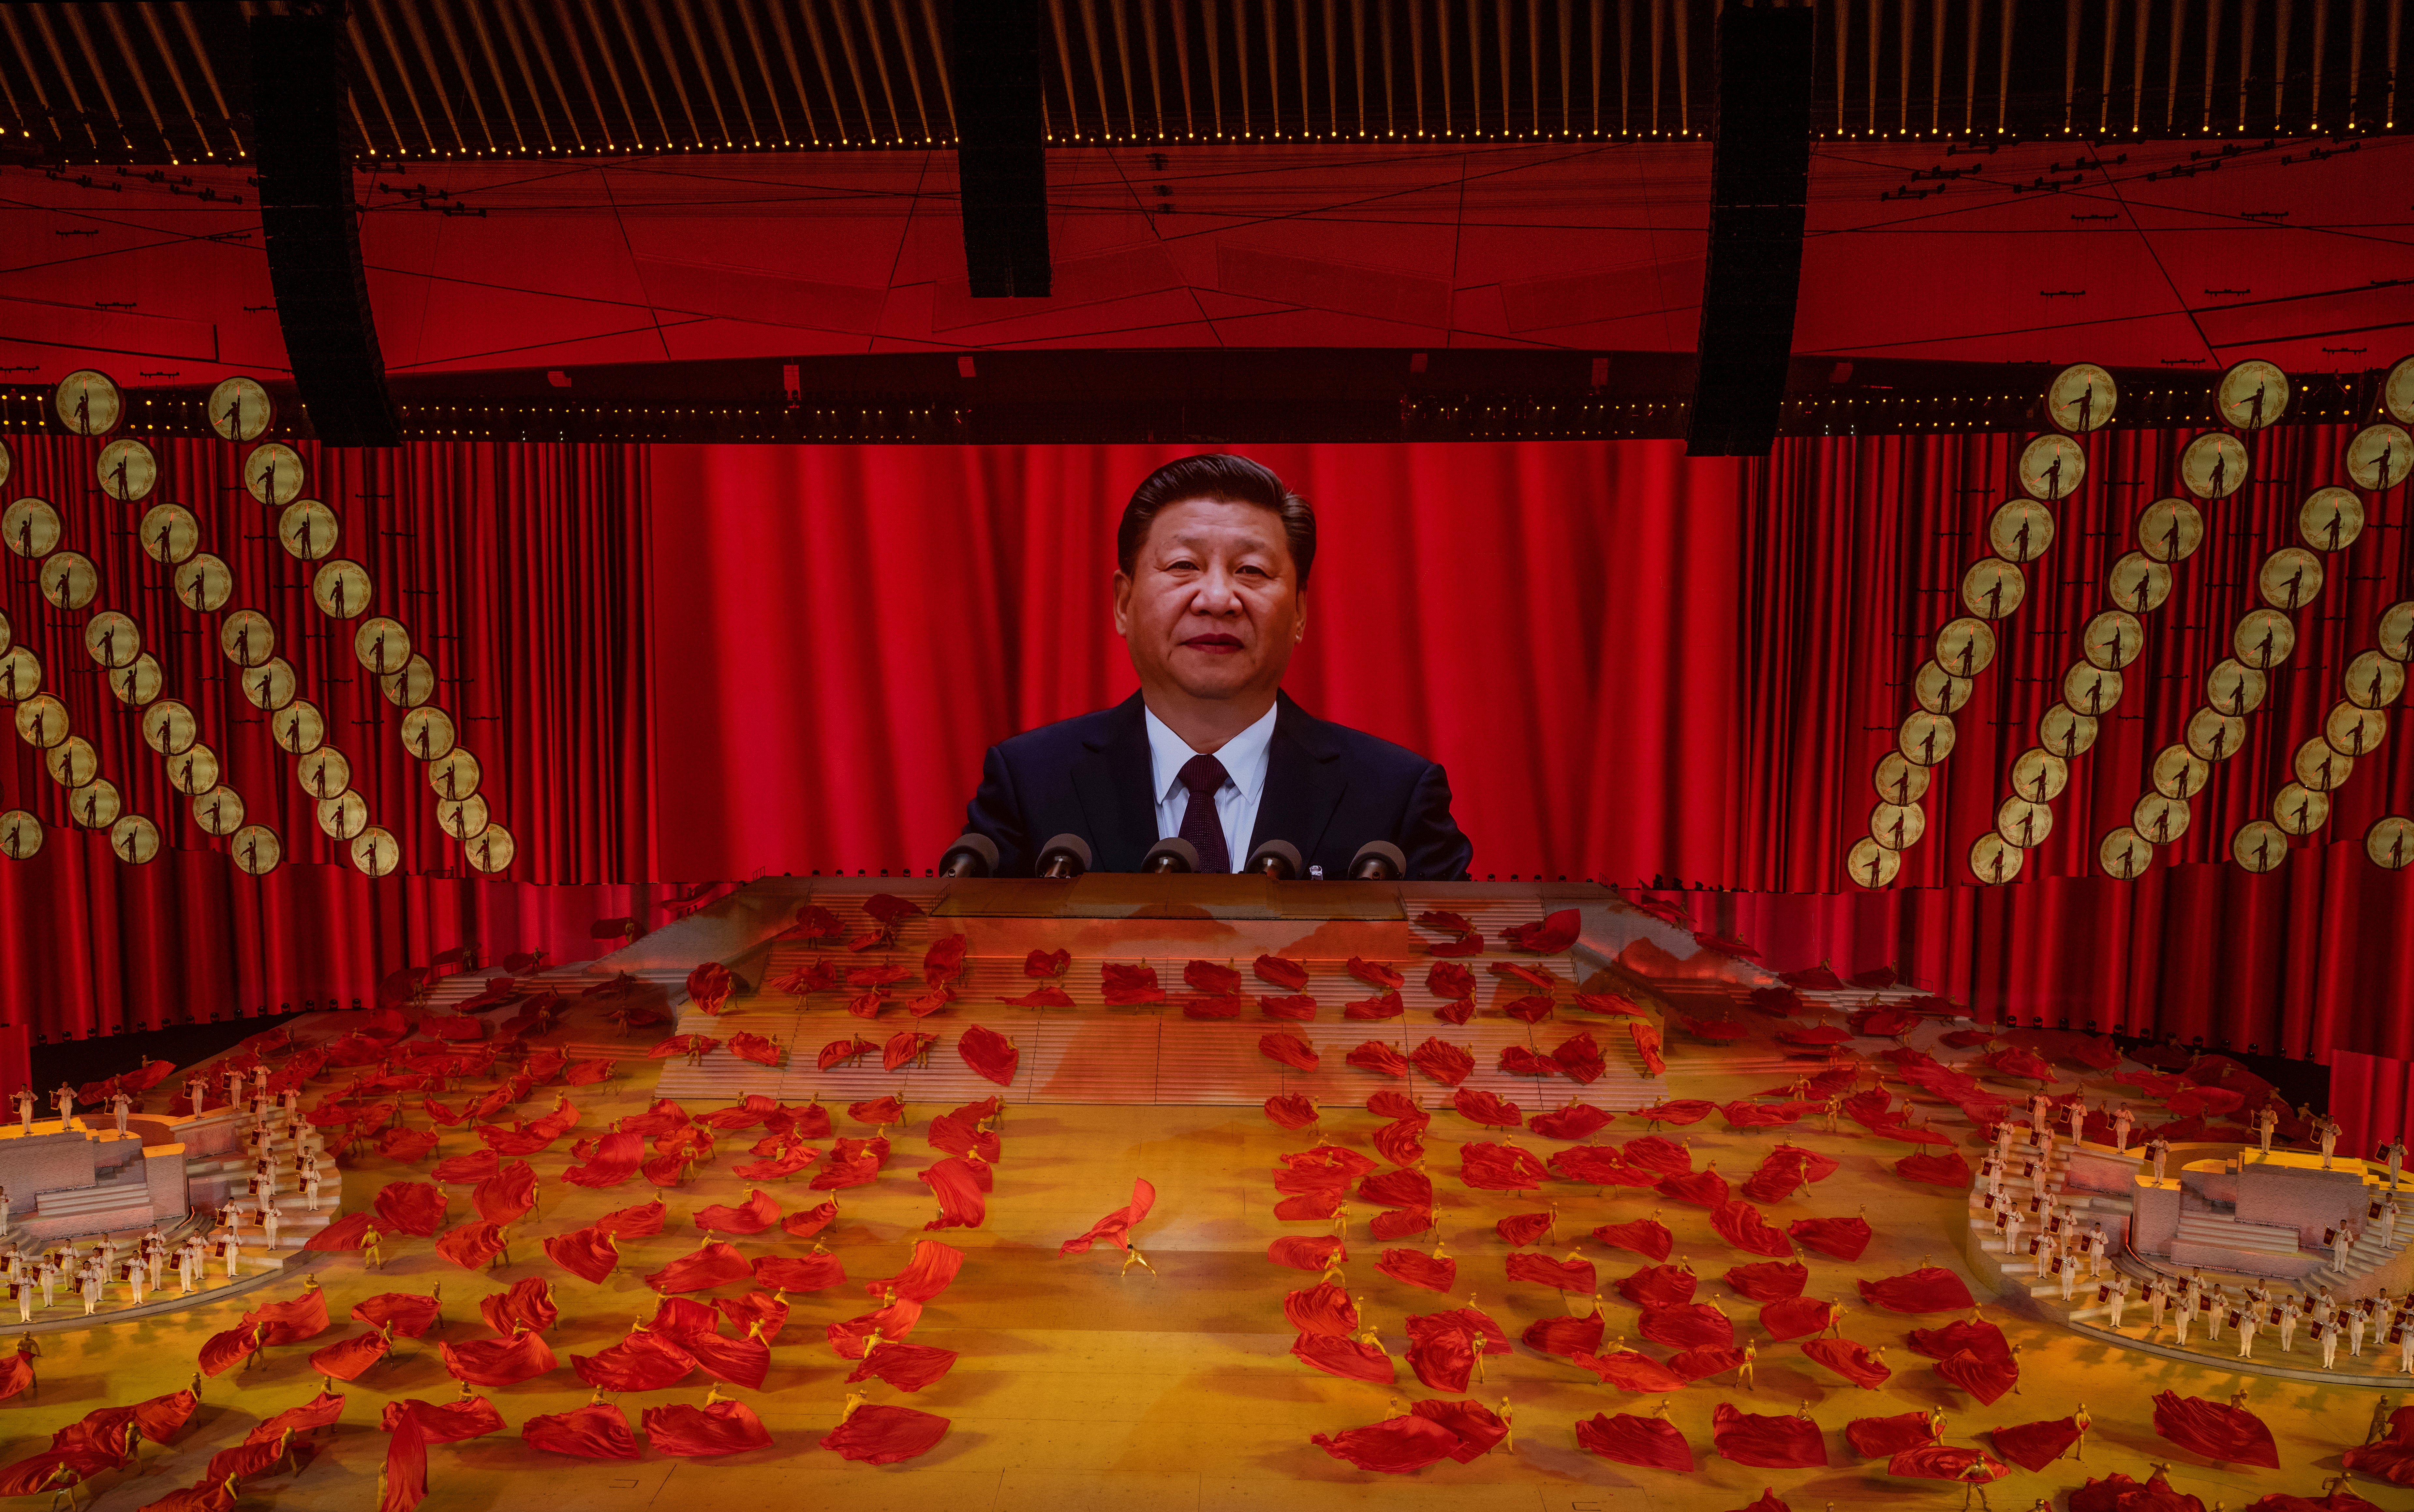 The Chinese Communist Party is preparing to celebrate 100 years of leadership